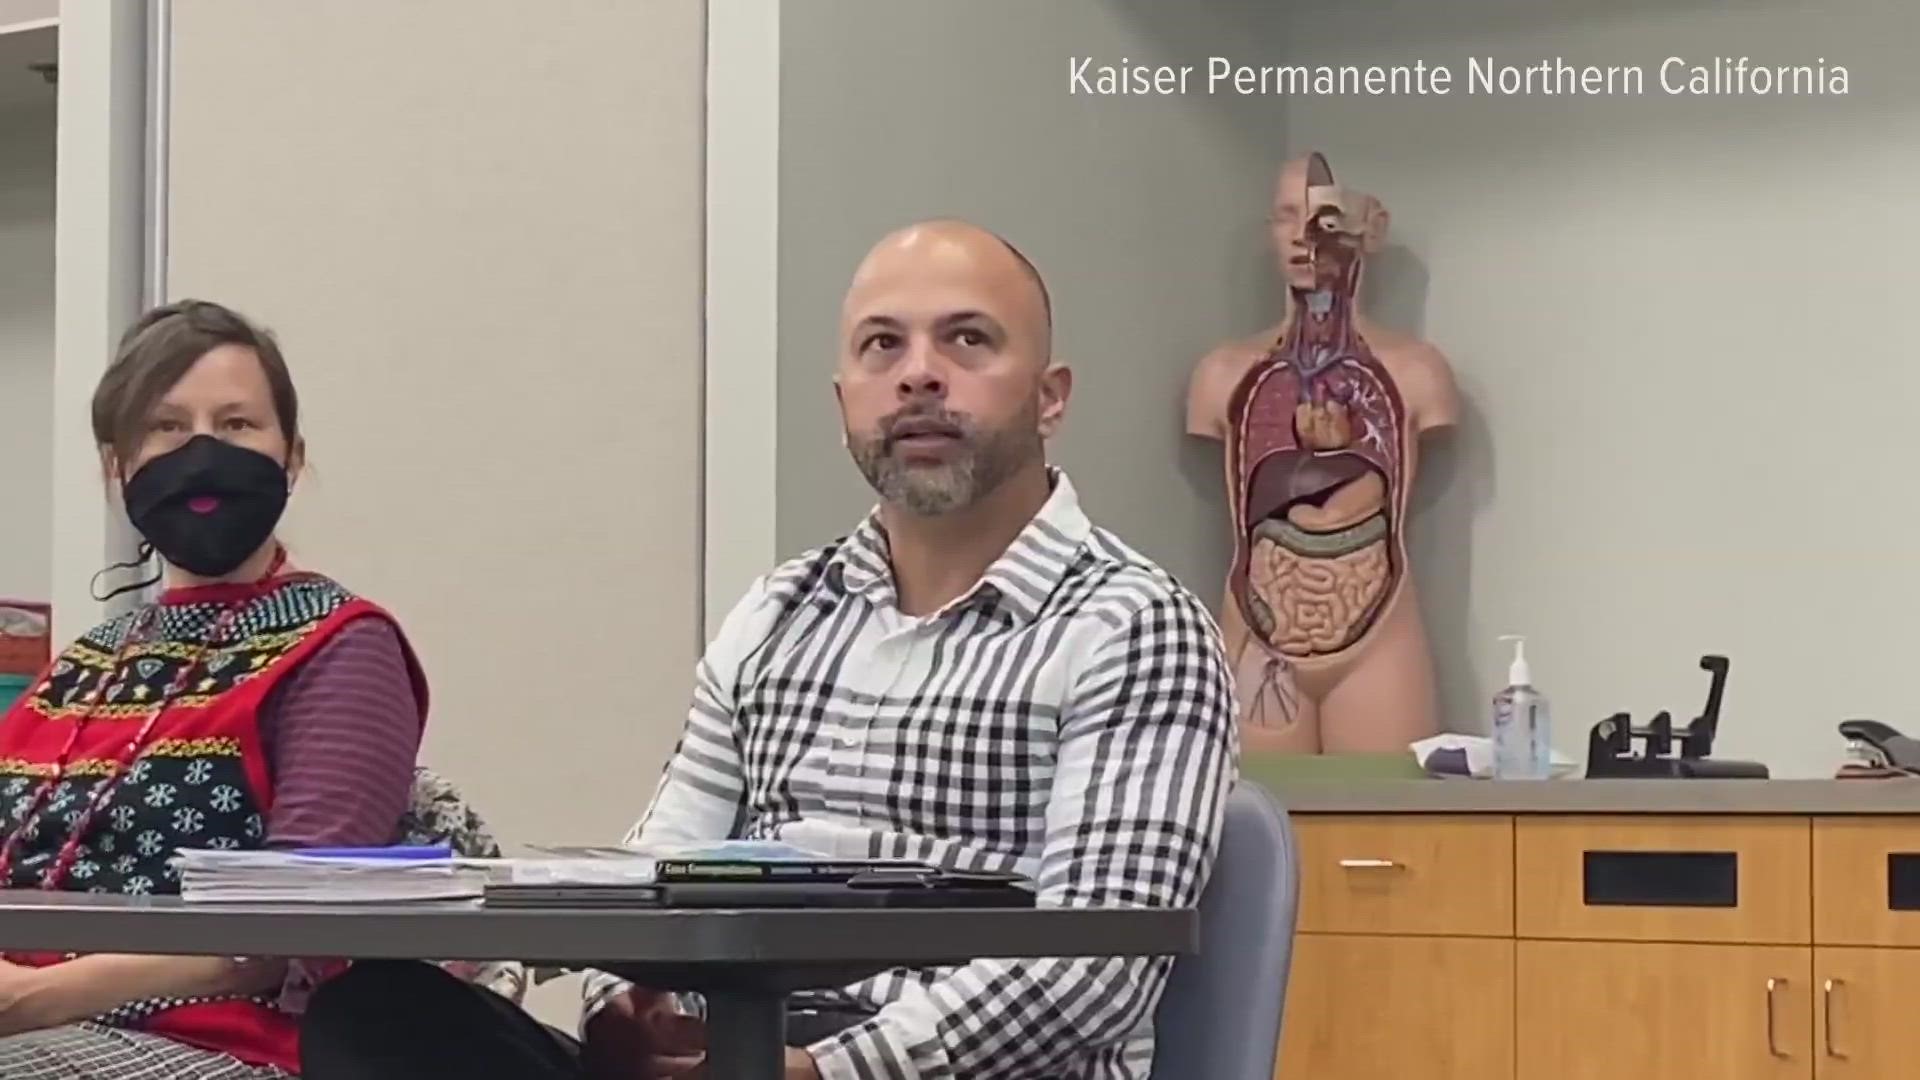 To help the need for more healthcare workers, Kaiser Permanente's program is aiming to make it easier for people to become counselors, therapists and more